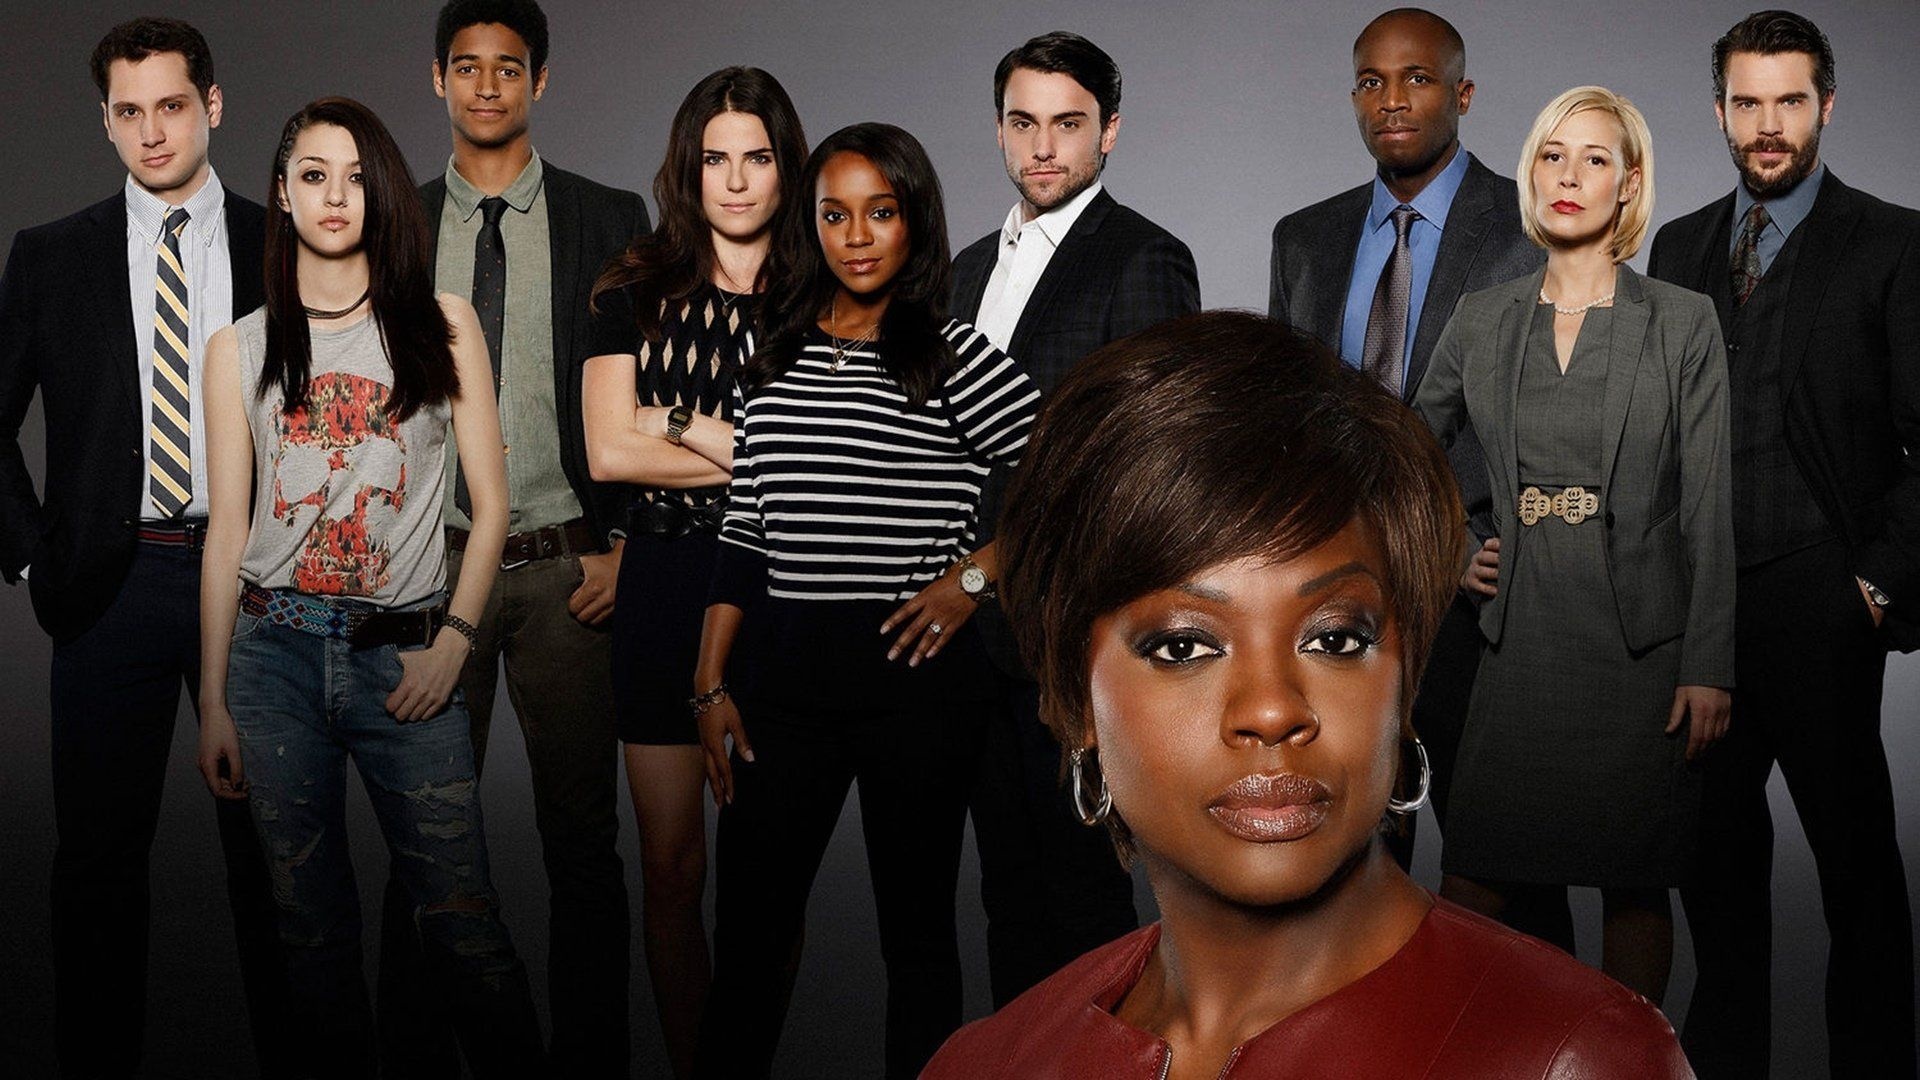 Viola Davis movies, How to get away with murder, Captivating wallpapers, Top backgrounds, 1920x1080 Full HD Desktop